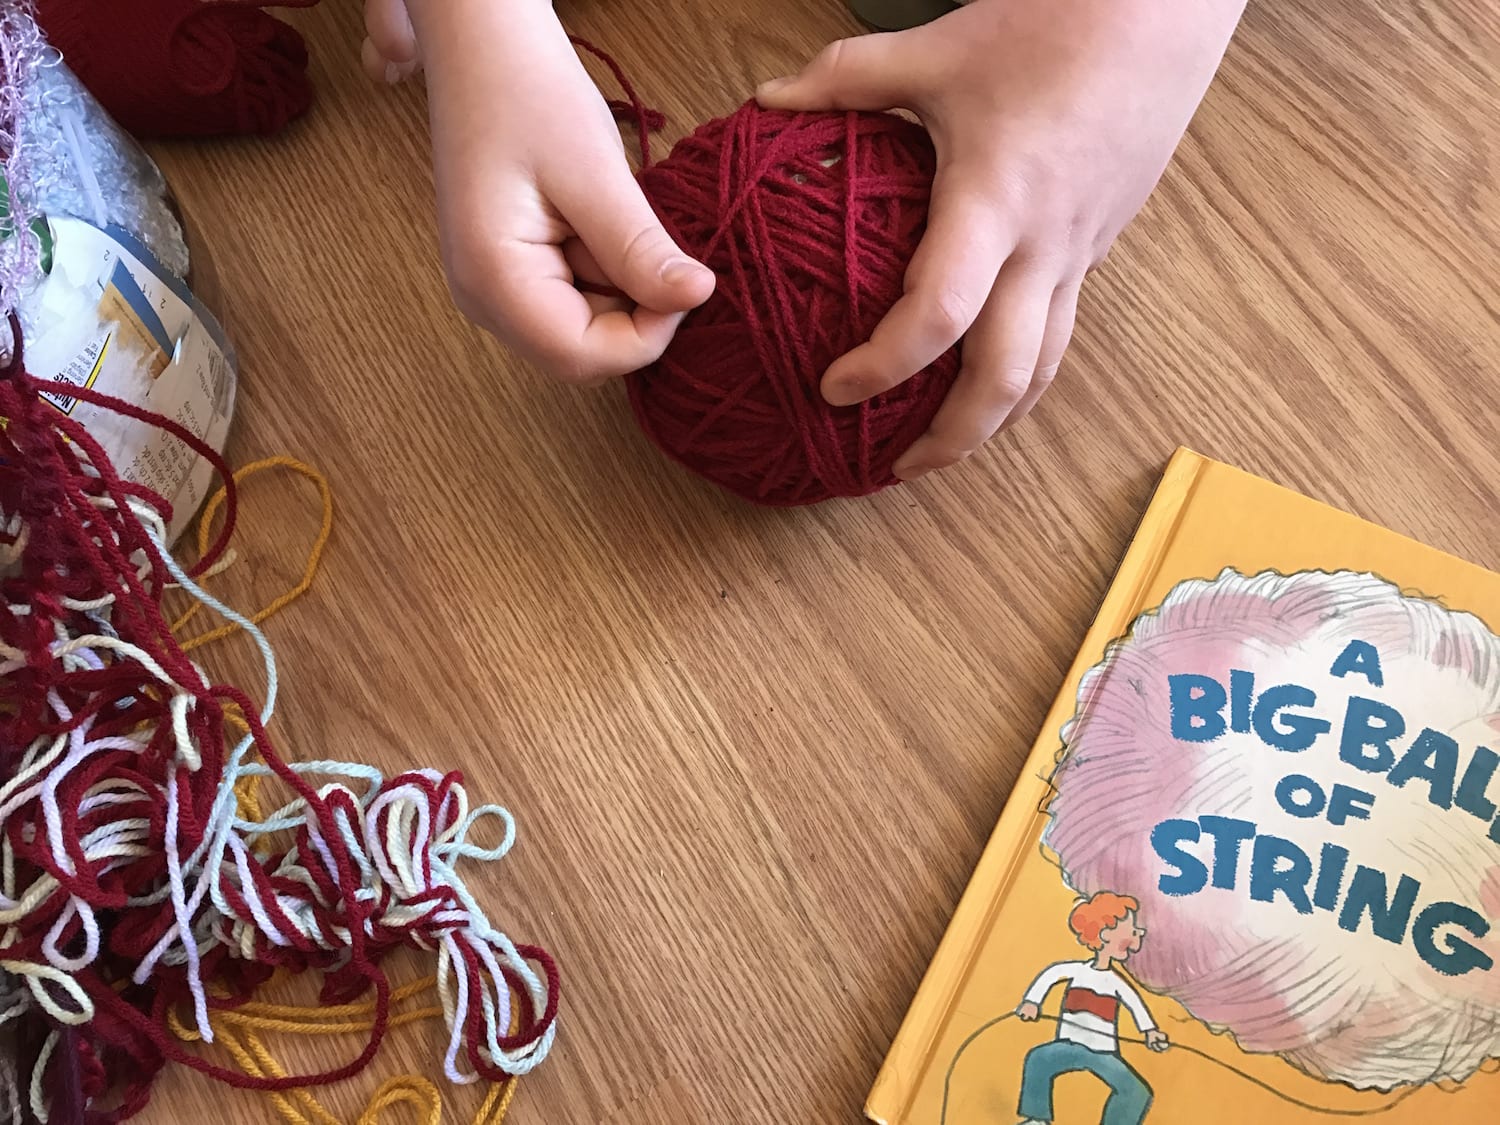 A Big Ball of String Kids Activity